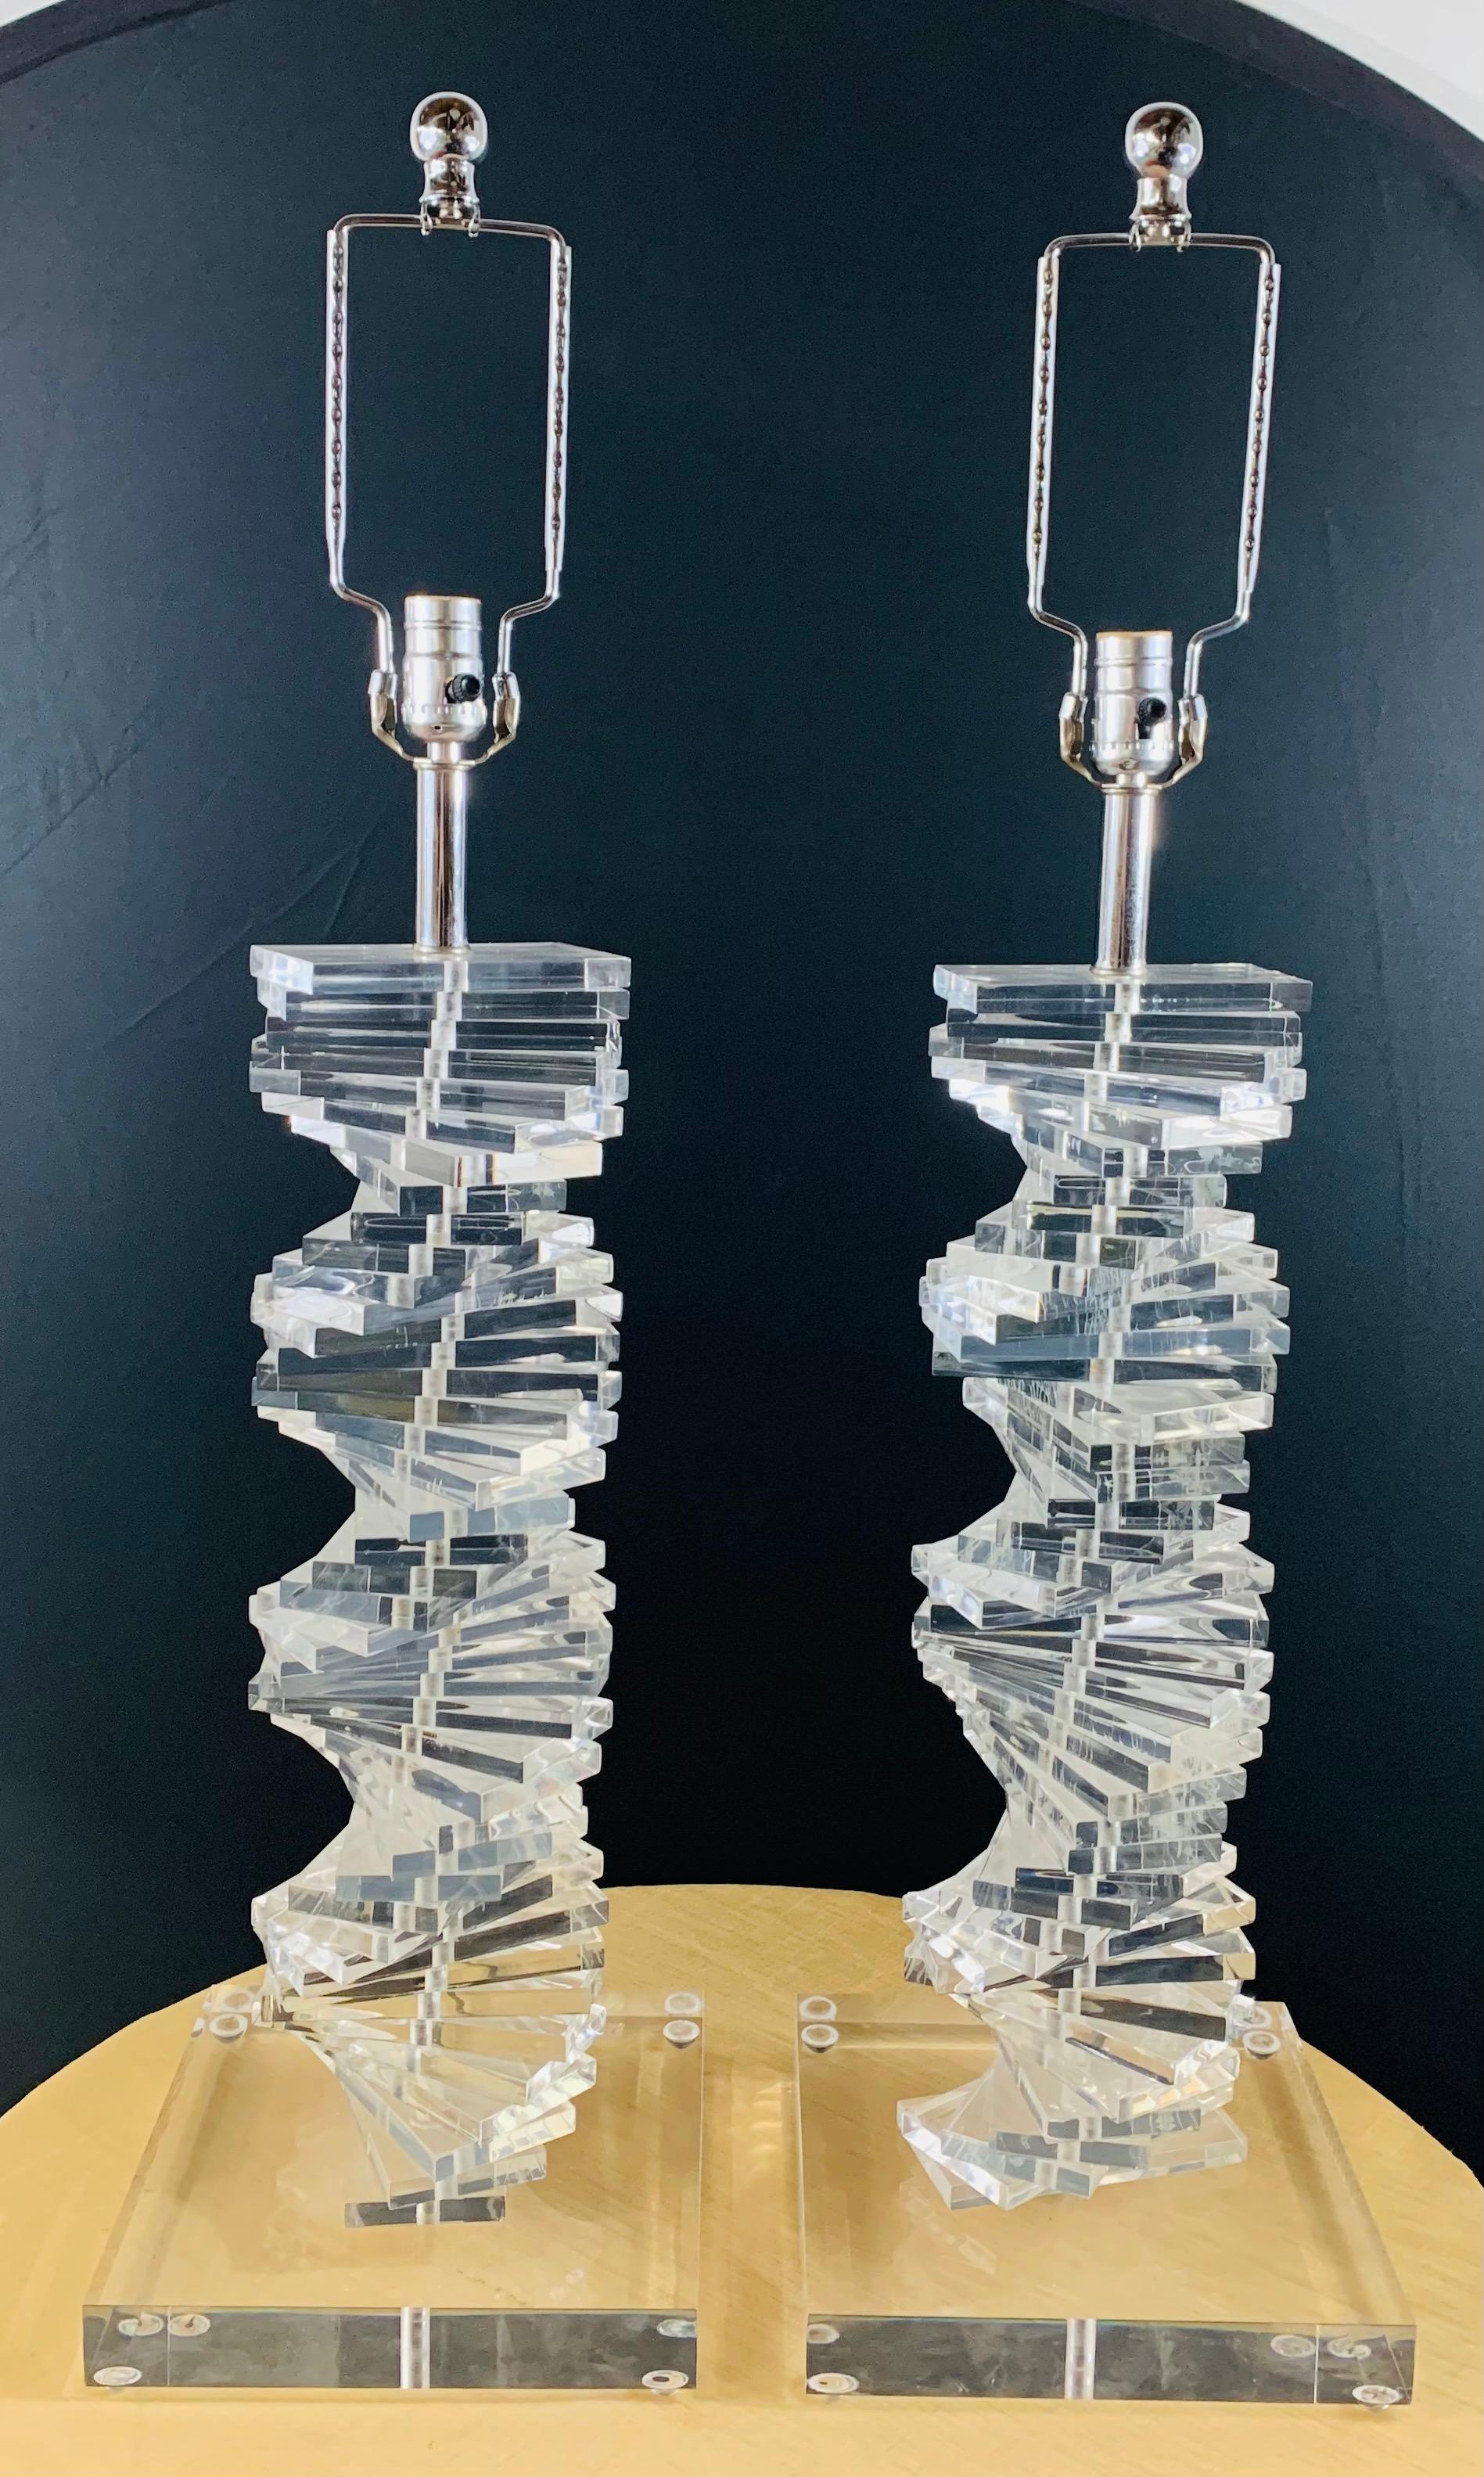 A stunning pair of Mid-Century Modern Lucite stacked Lucite table lamps, in the grand spiral staircase design. Each lamp stands on a square Lucite base. The MCM lamps are a statement period pieces and will light any room while adding style and